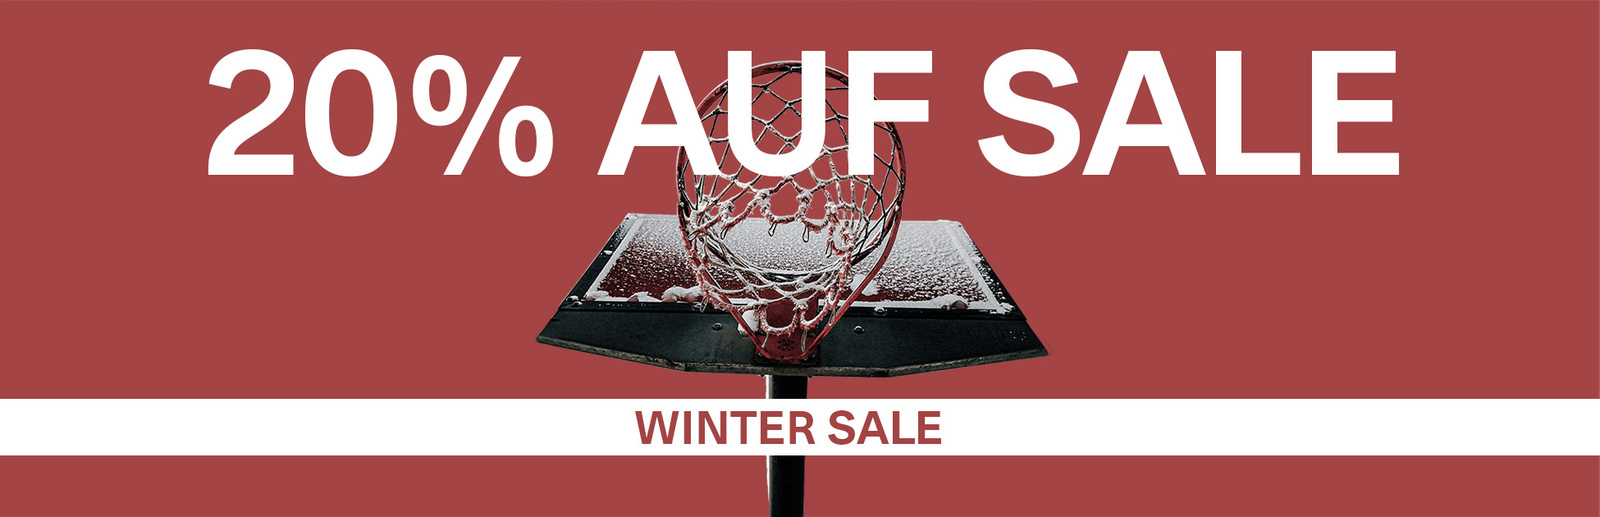 WINTER SALE - UP TO 50% OFF!